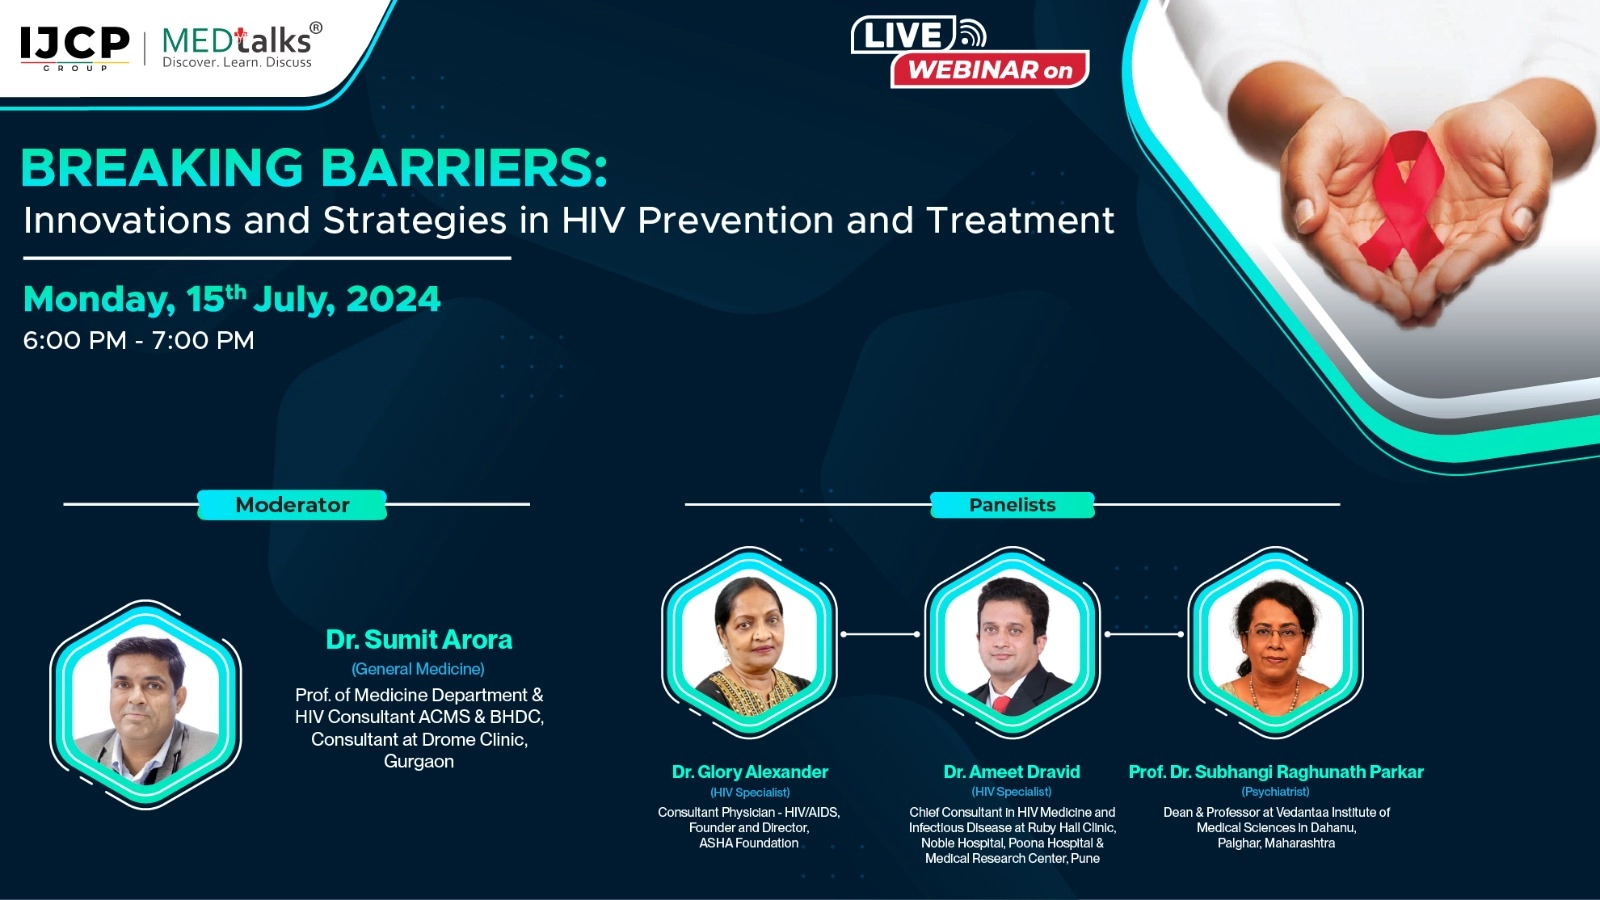 Breaking Barriers: Innovations and Strategies in HIV Prevention and Treatment